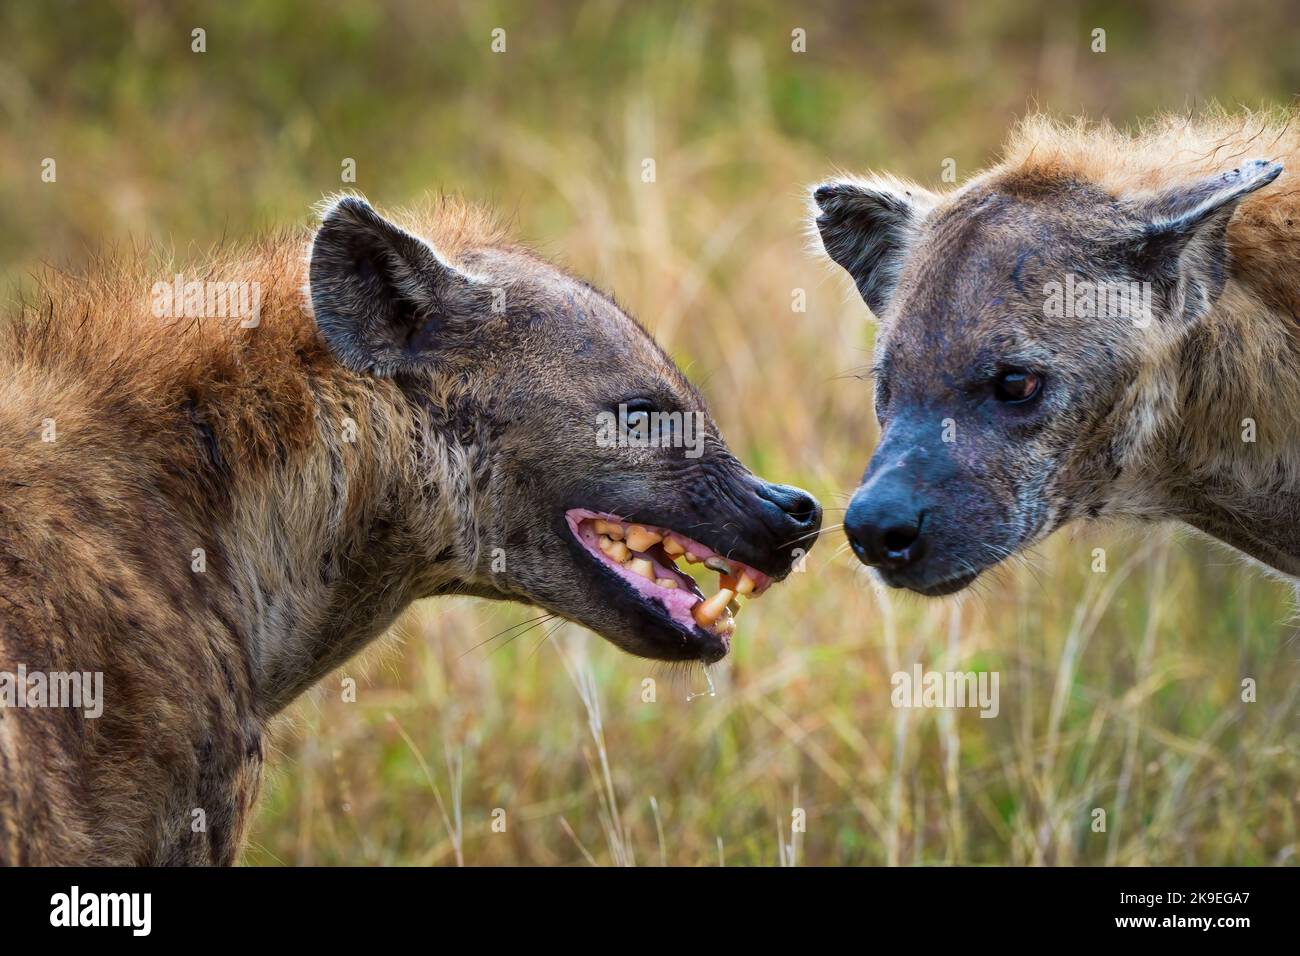 Spotted hyena or laughing hyena (Crocuta crocuta) showing submissive behaviour by flattening the ears and showing teeth. Mpumalanga. South Africa. Stock Photo